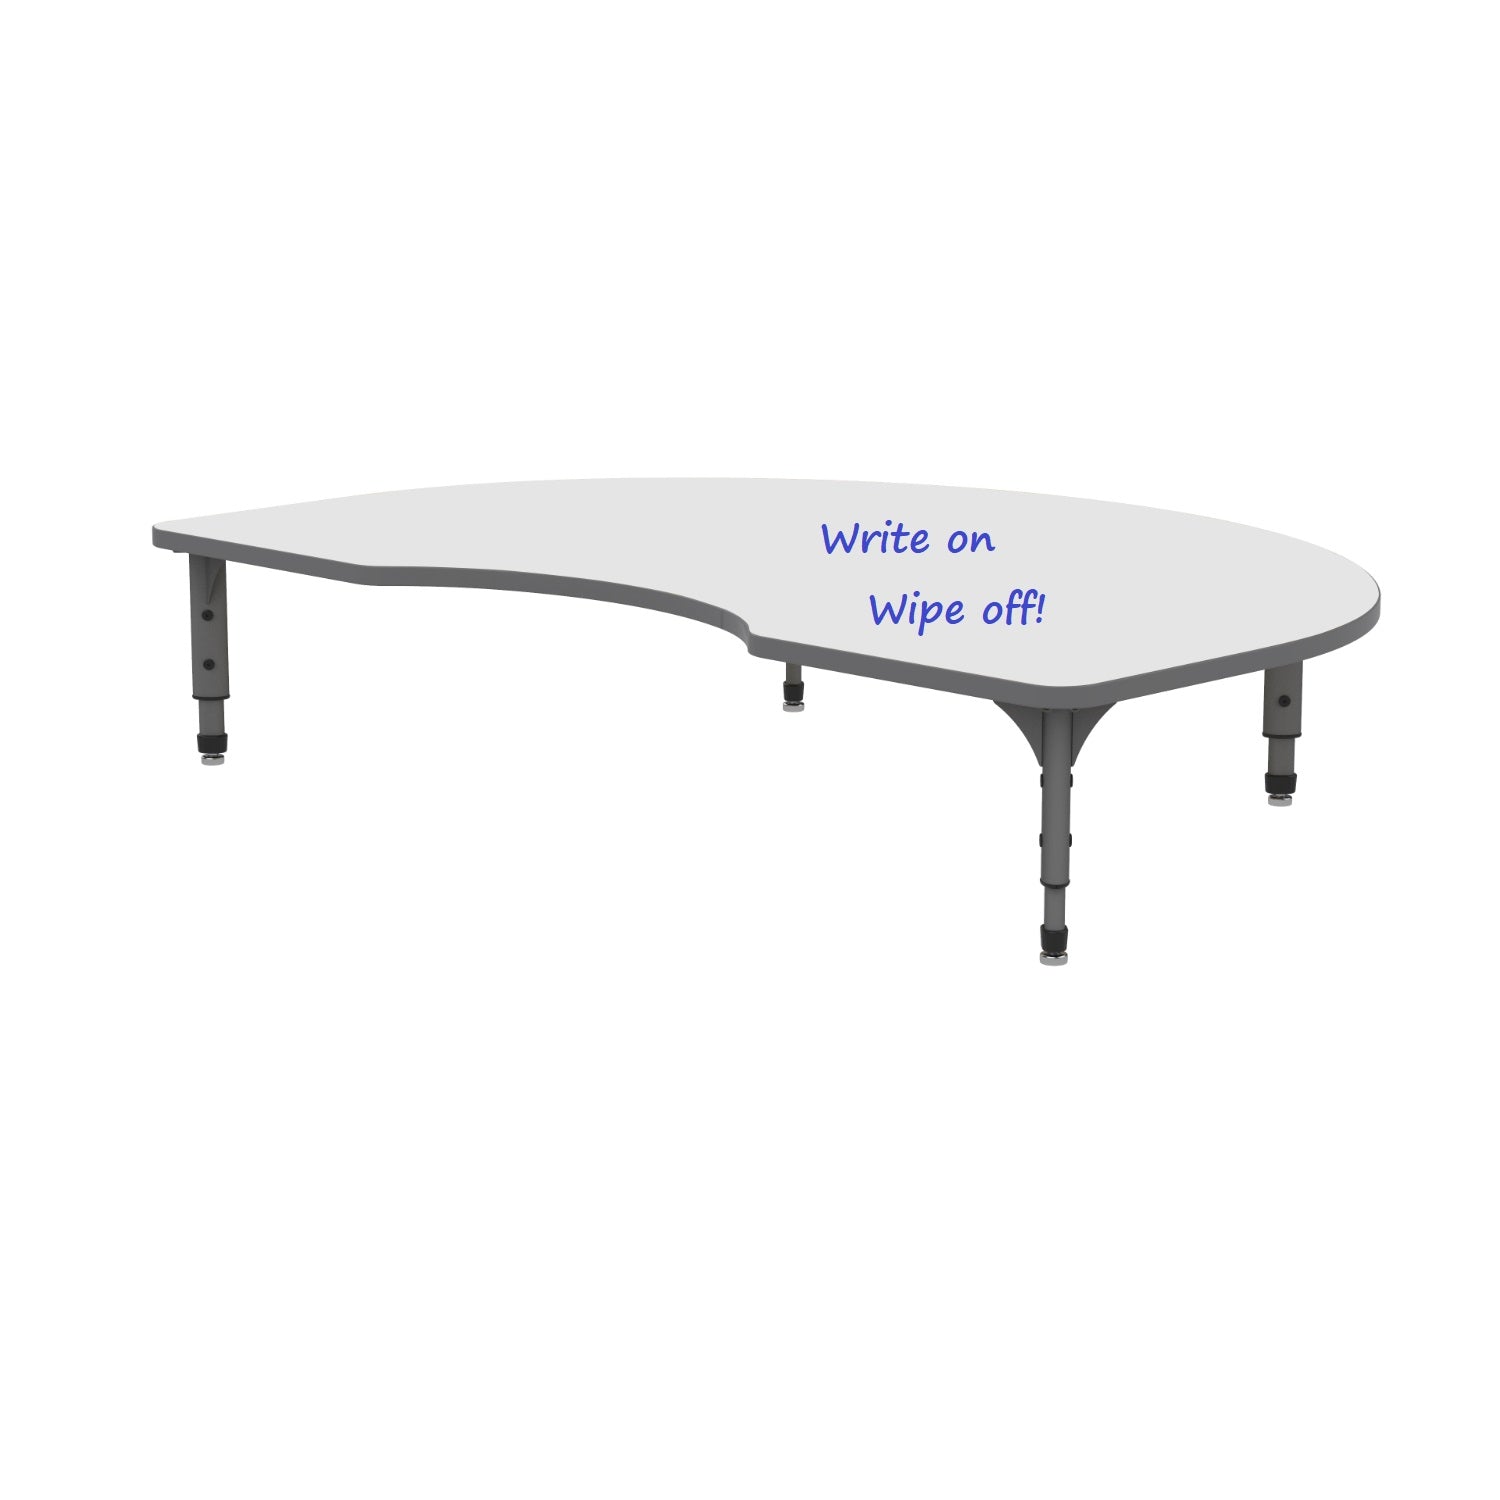 Adjustable Height Floor Activity Table with White Dry-Erase Markerboard Top, 48" x 72" Kidney